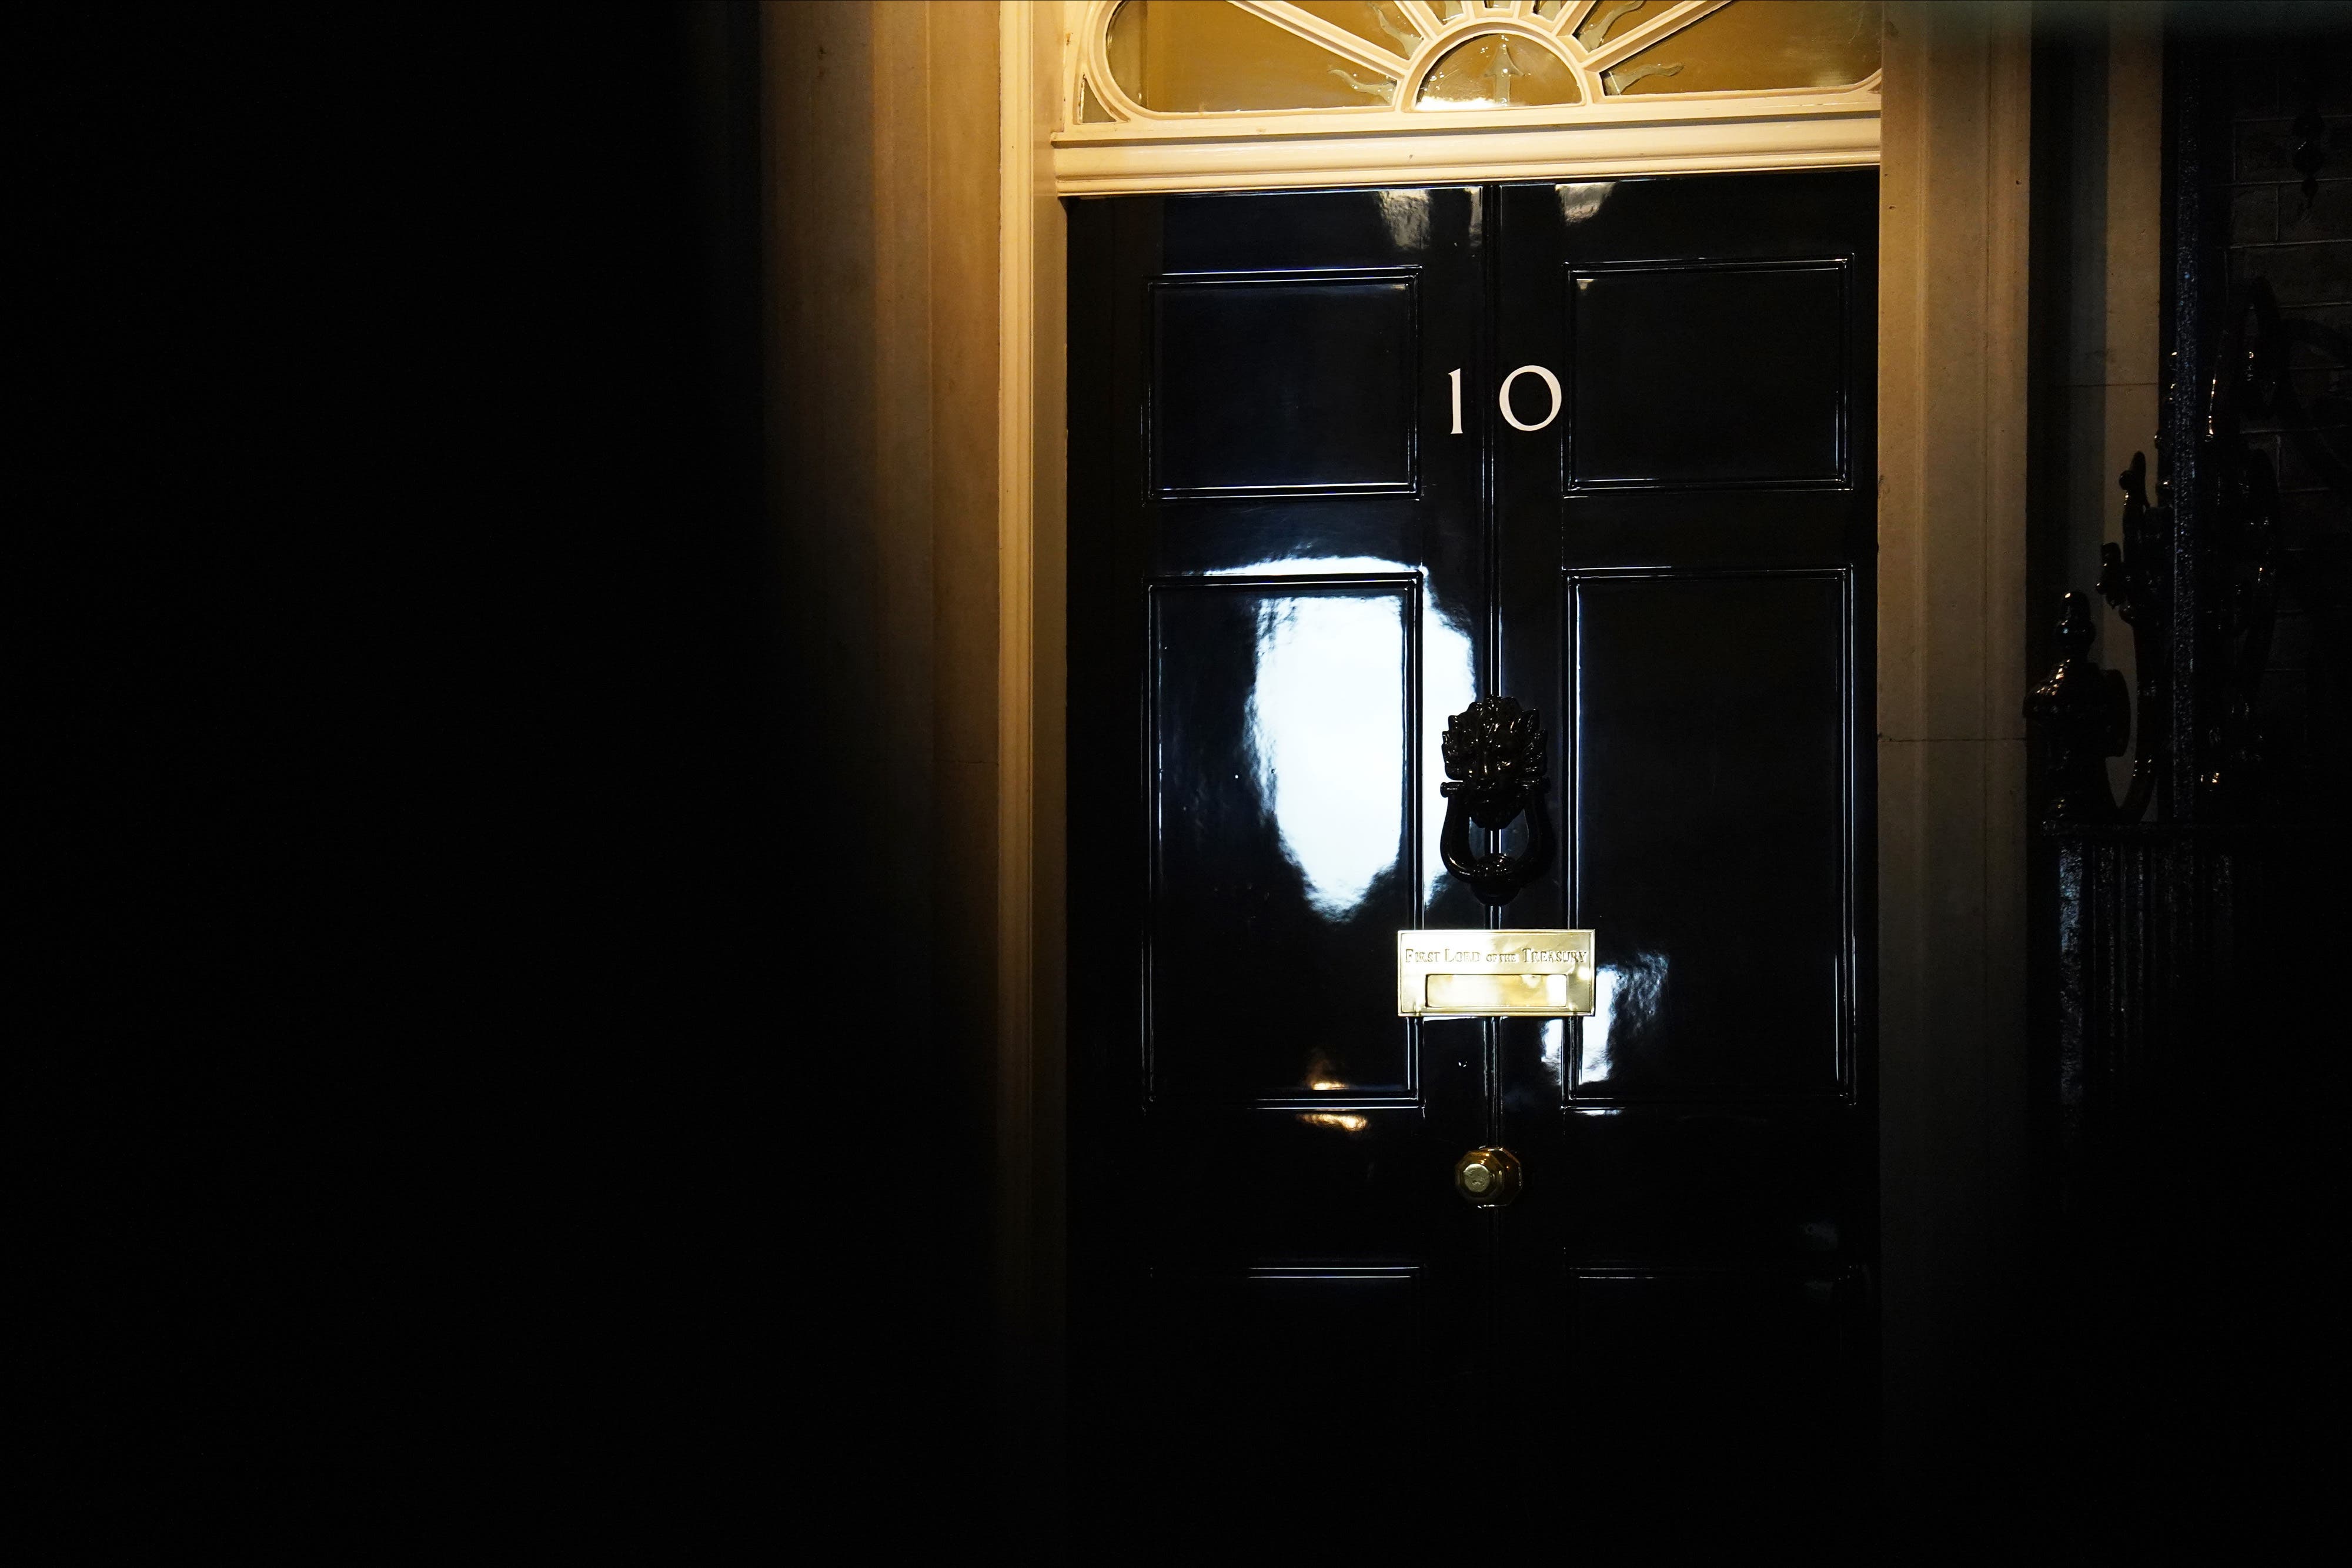 A number of Tufton Street alumni have been appointed as Downing Street advisers over the years